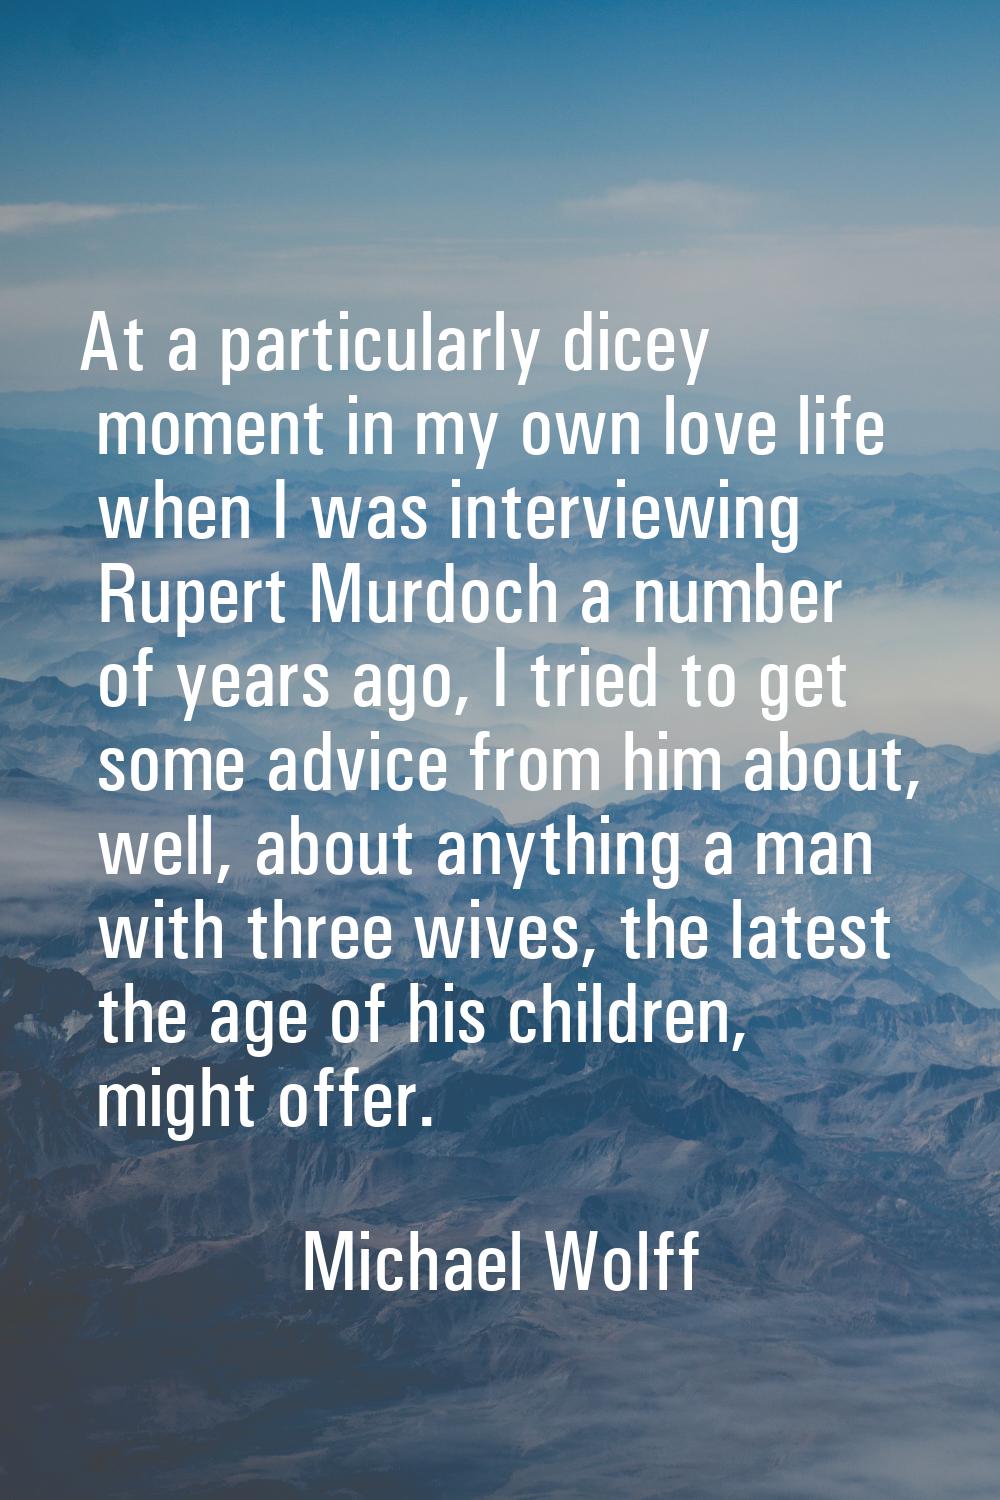 At a particularly dicey moment in my own love life when I was interviewing Rupert Murdoch a number 